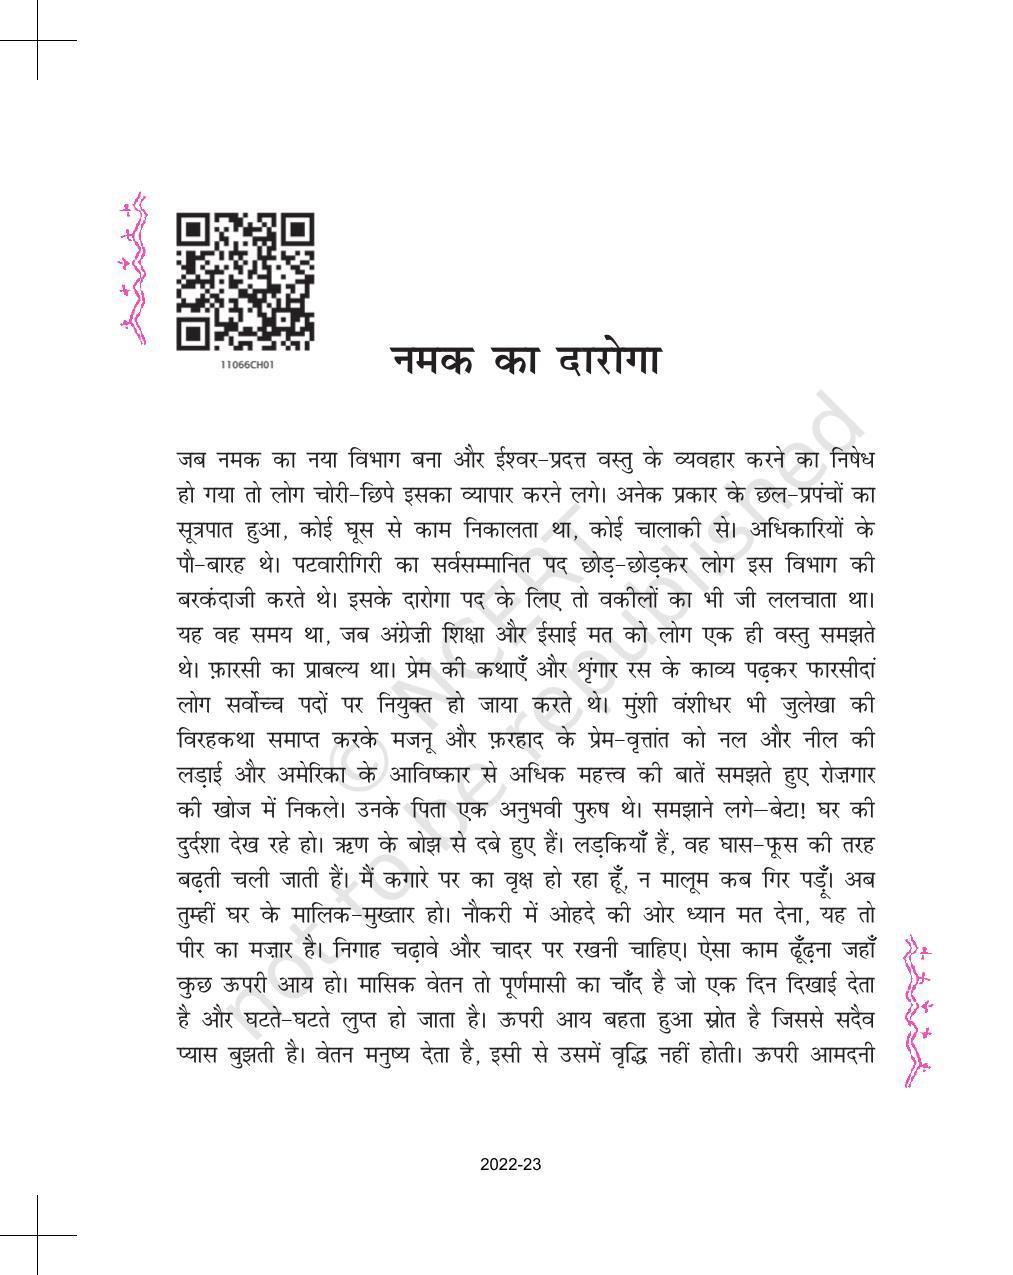 NCERT Book for Class 11 Hindi Aroh Chapter 1 नमक का दारोगा - Page 6